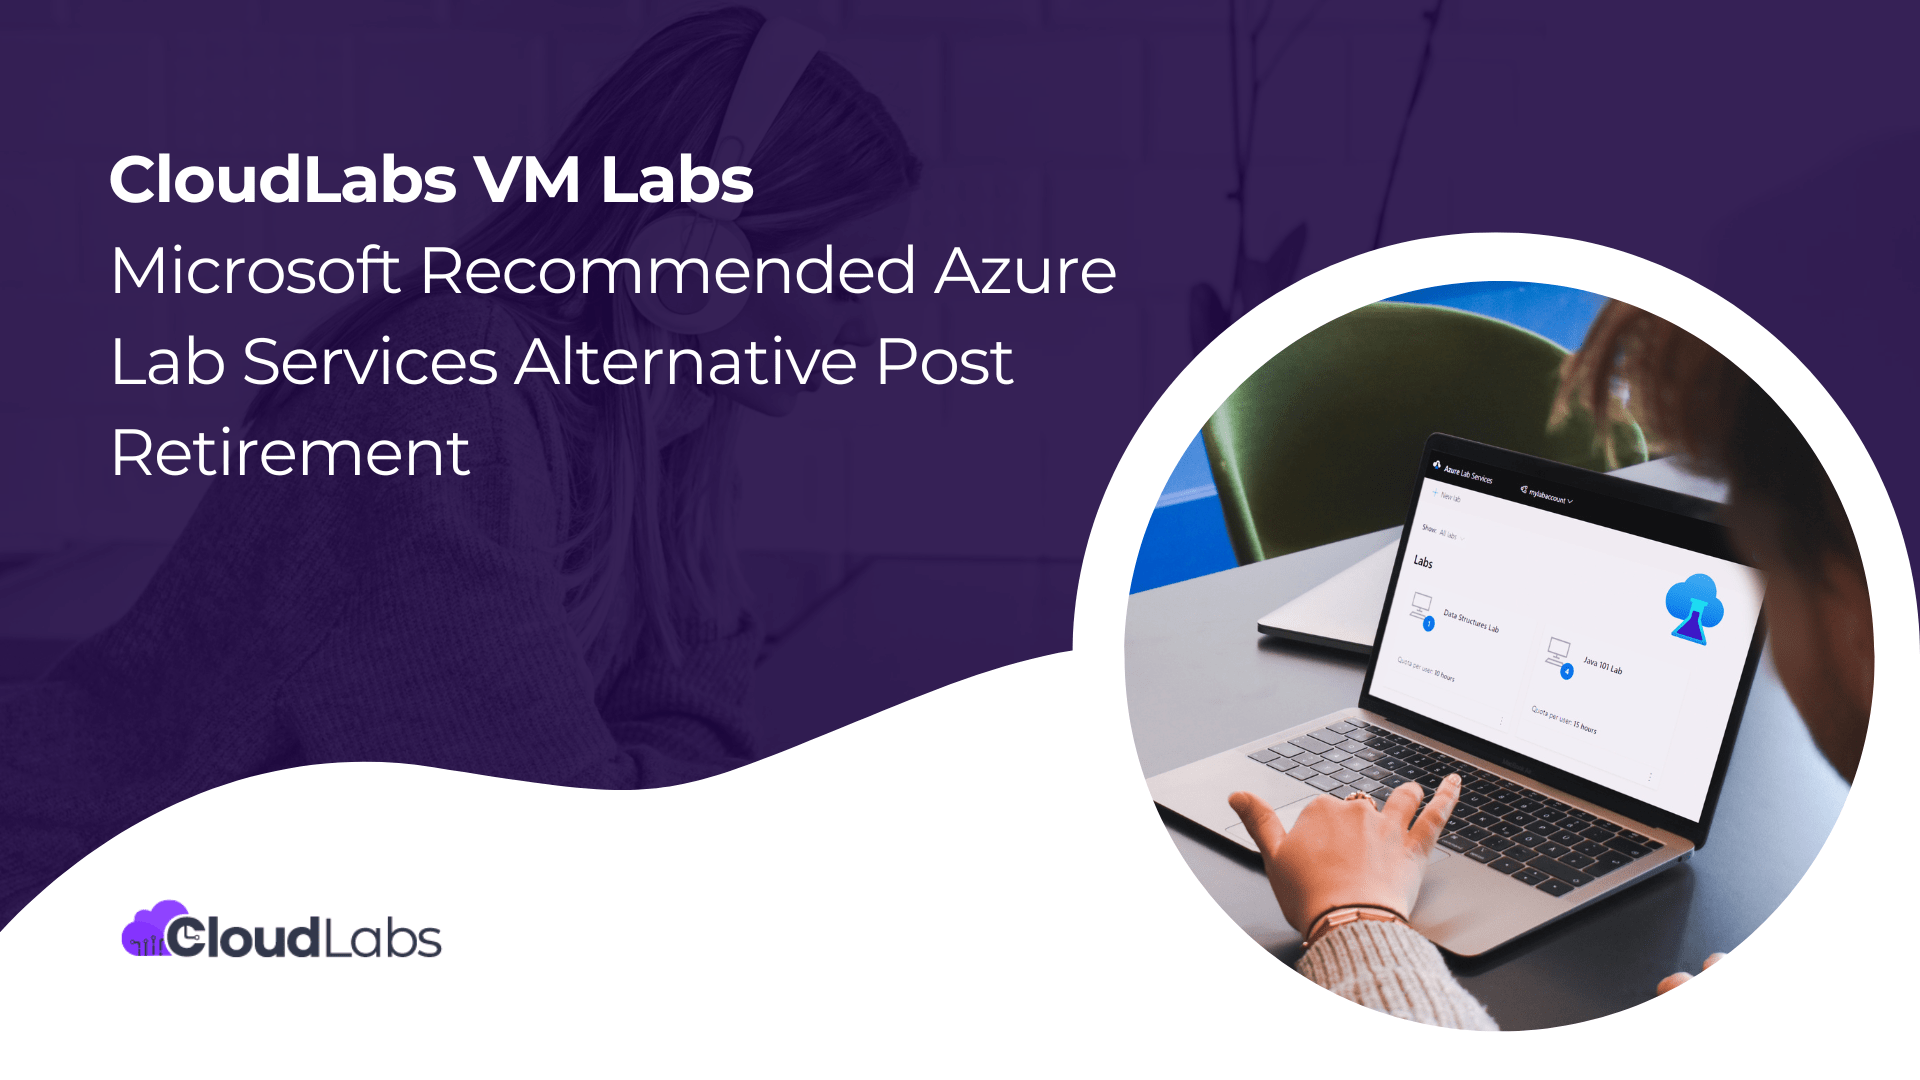 CloudLabs VM Labs: Microsoft Recommended Azure Lab Services Alternative Post Retirement